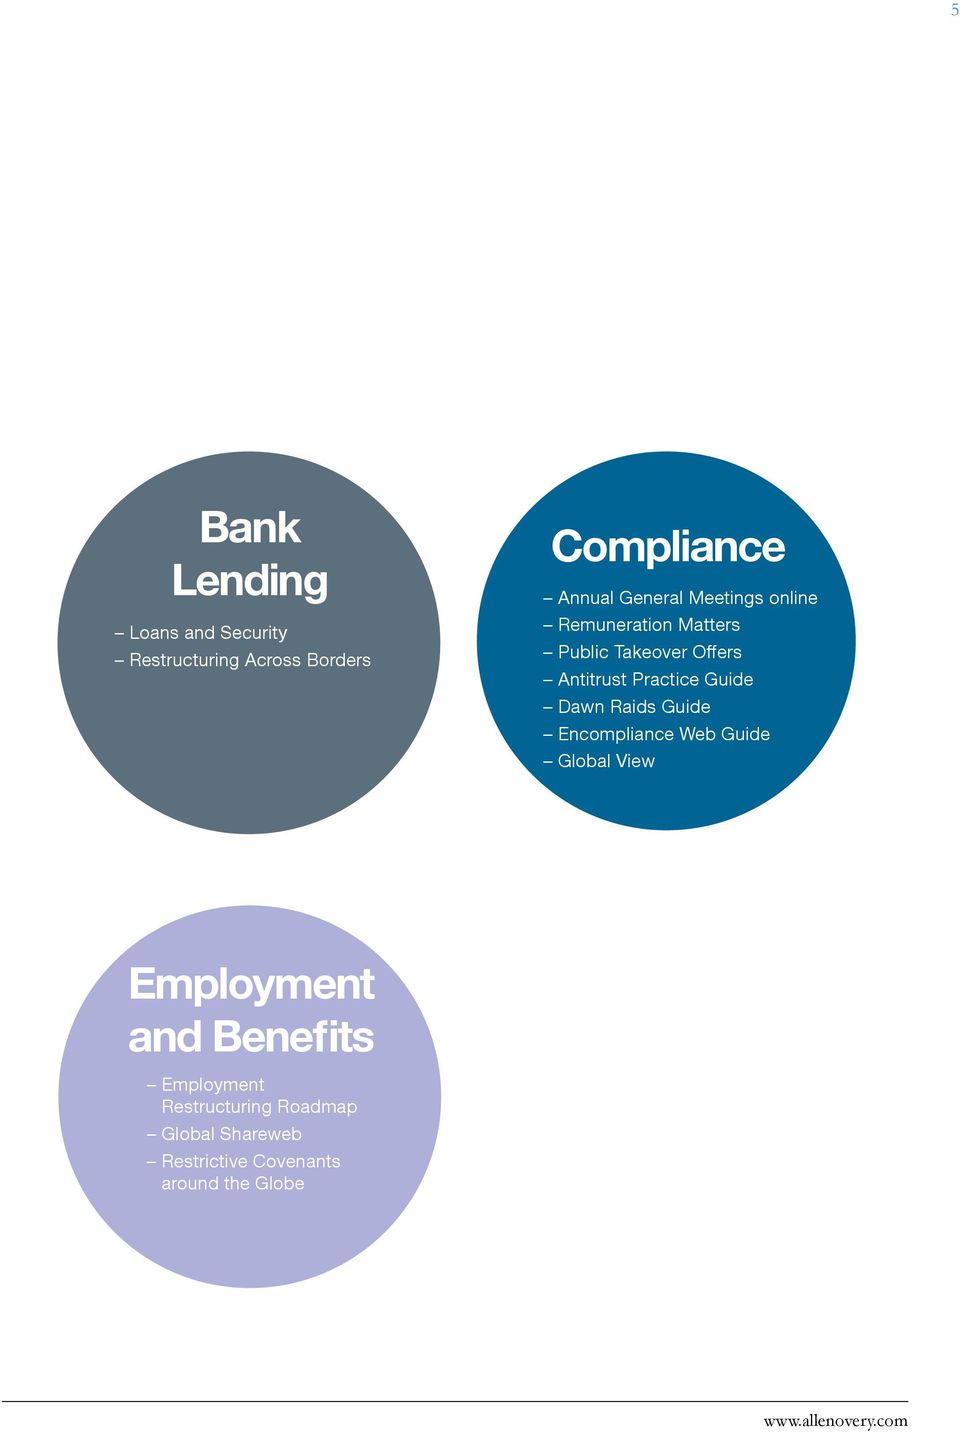 Practice Guide Dawn Raids Guide Encompliance Web Guide Global View Employment and